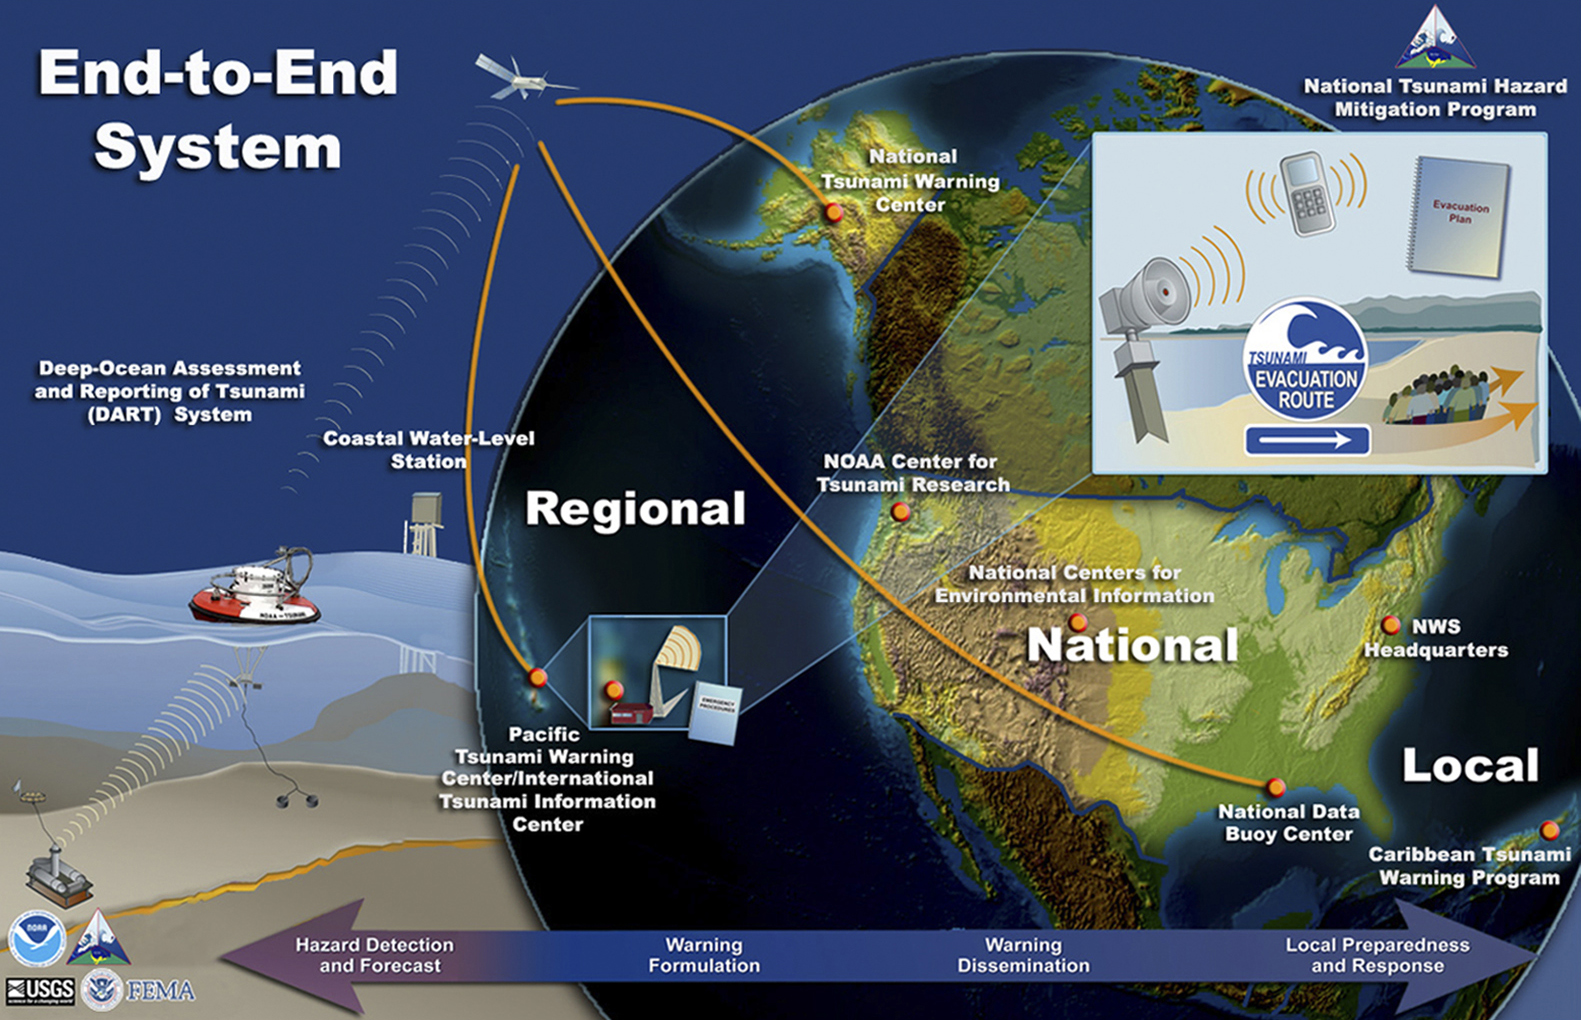 End-to-end Tsunami Warning System infographic.